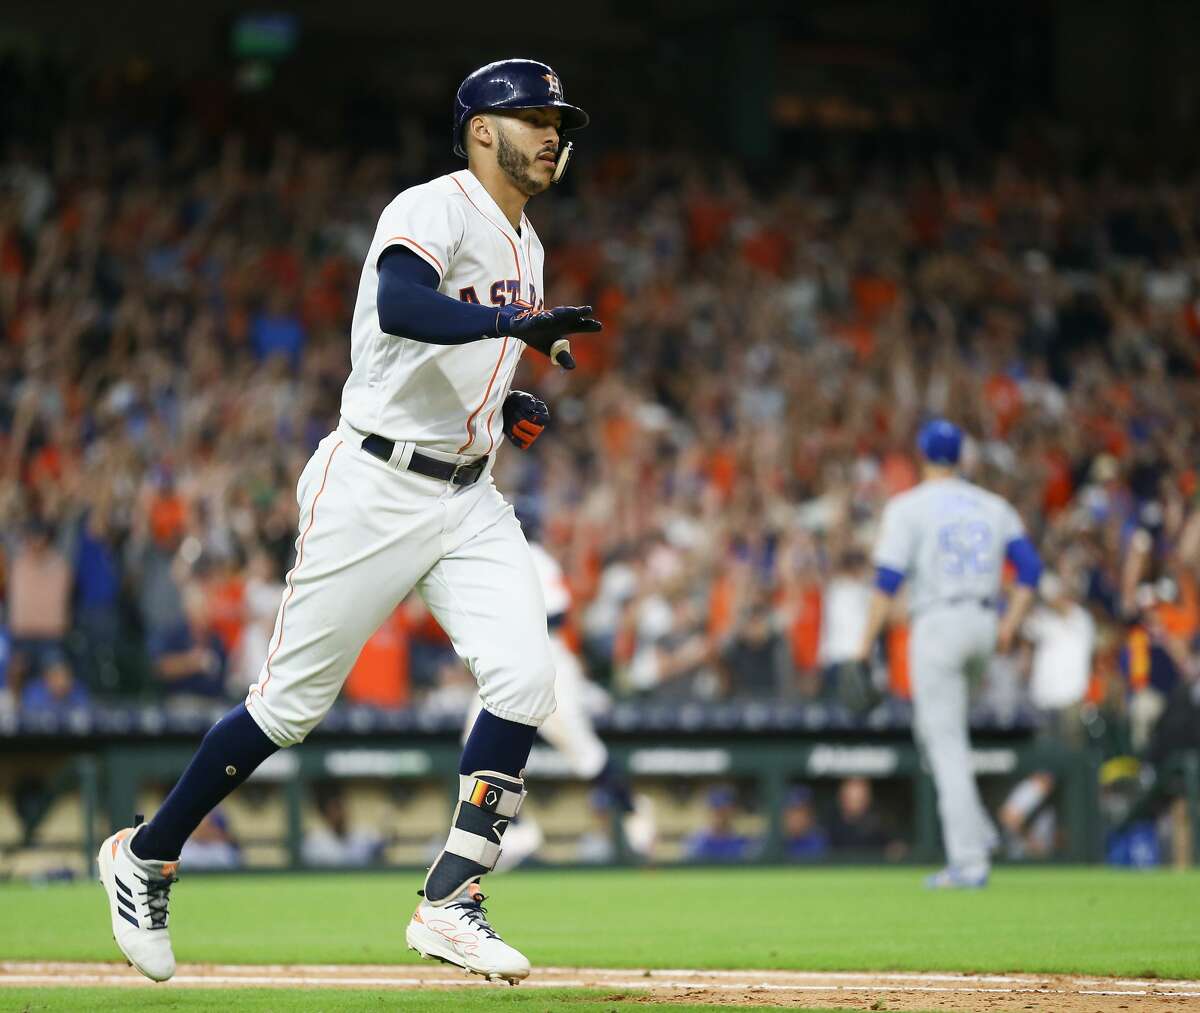 HOUSTON, TX - JUNE 23: Carlos Correa #1 of the Houston Astros hits a walkoff single in the twelfth inning against the Kansas City Royals for a 4-3 win at Minute Maid Park on June 23, 2018 in Houston, Texas. (Photo by Bob Levey/Getty Images)